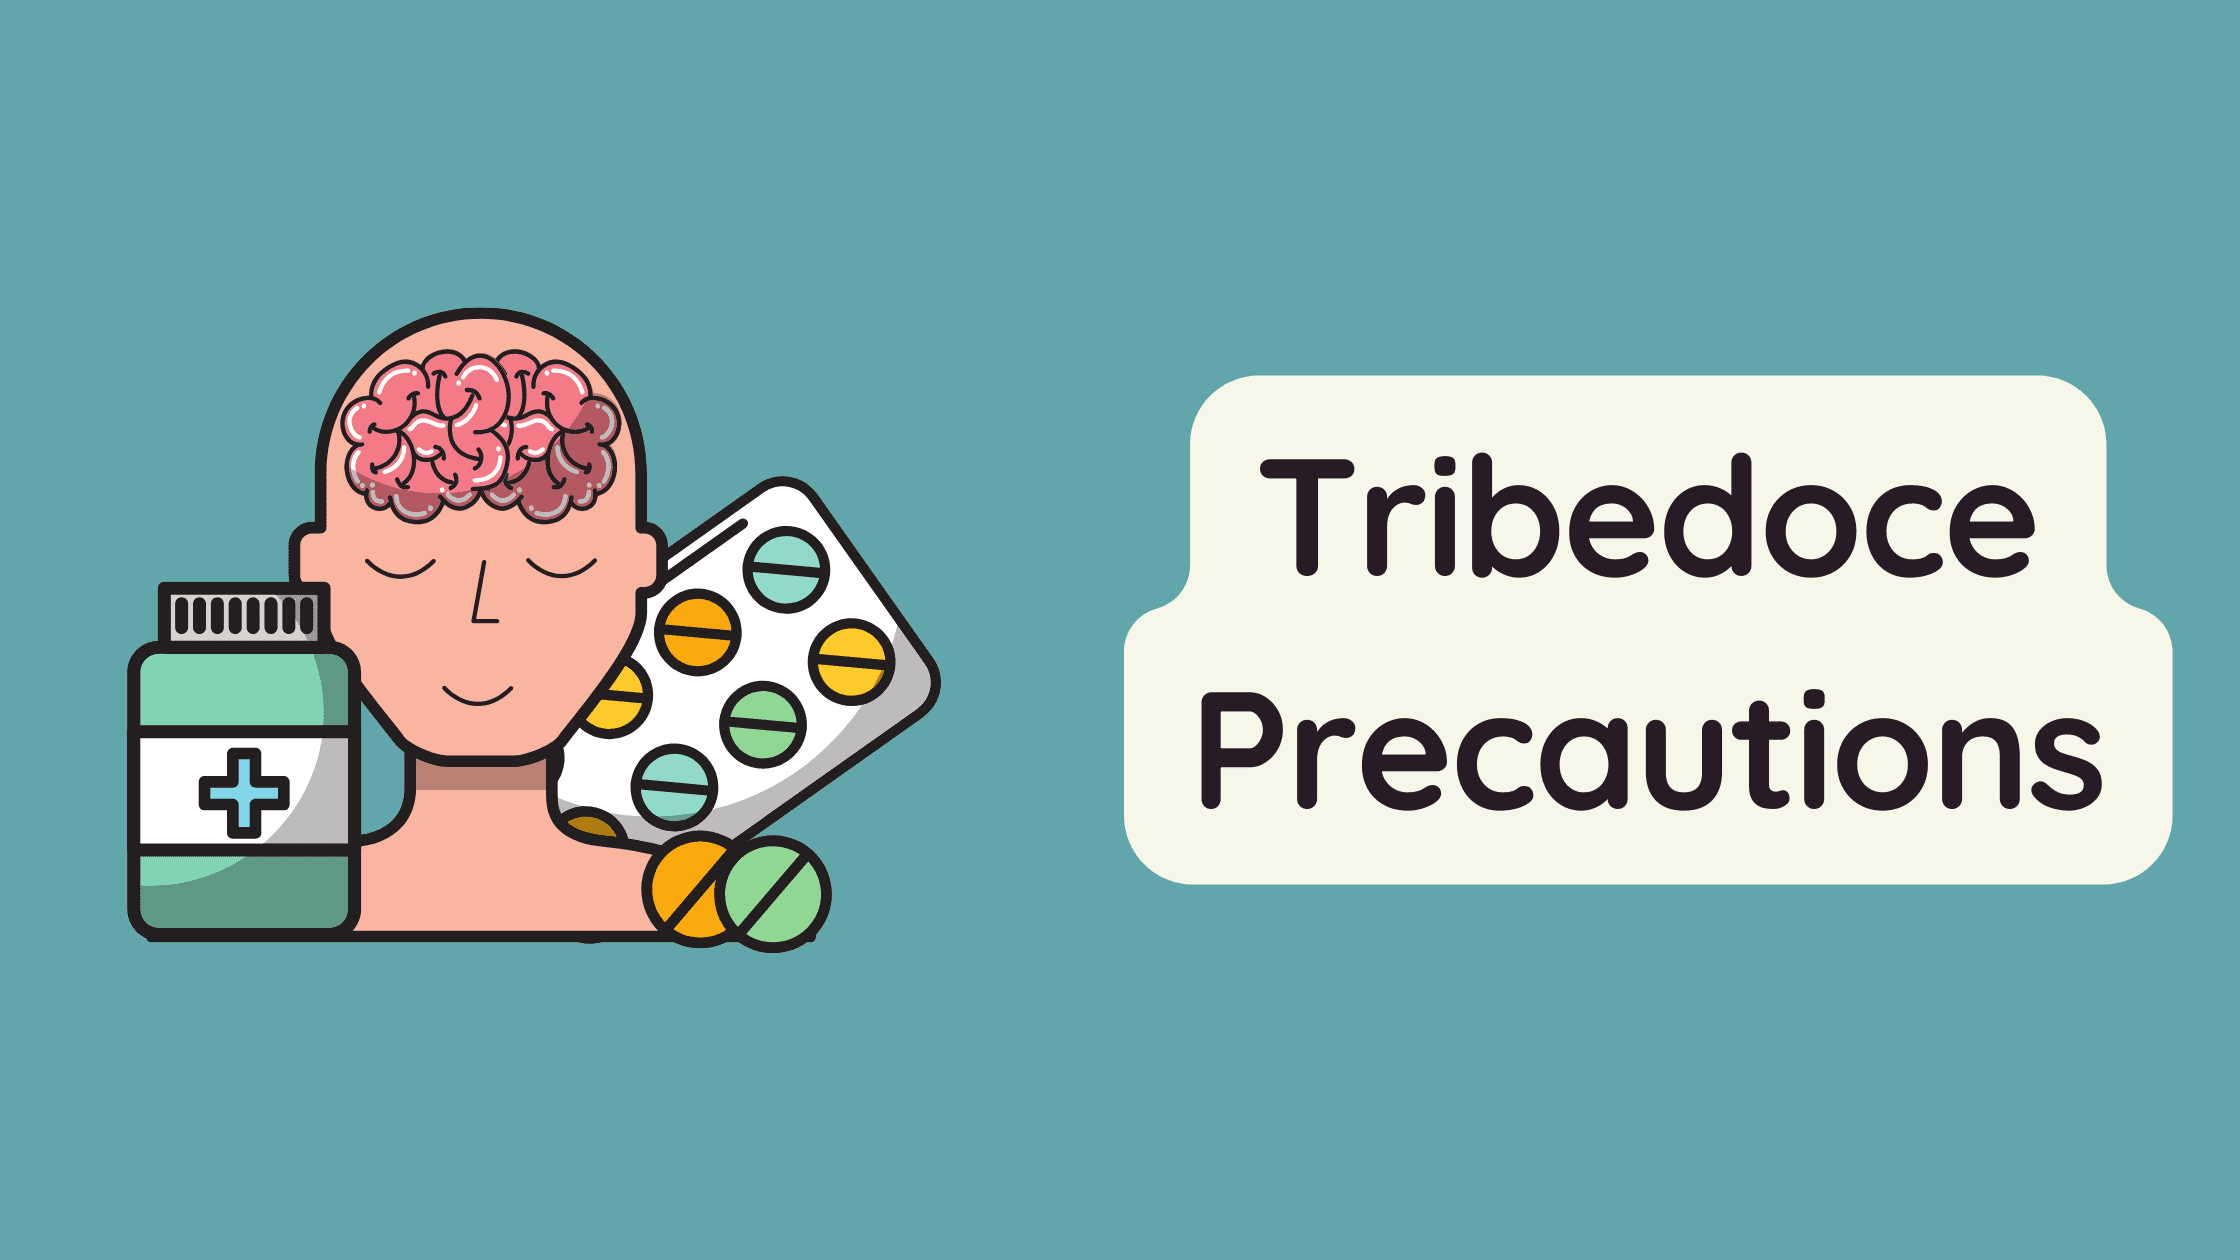 Uses of Tribedoce